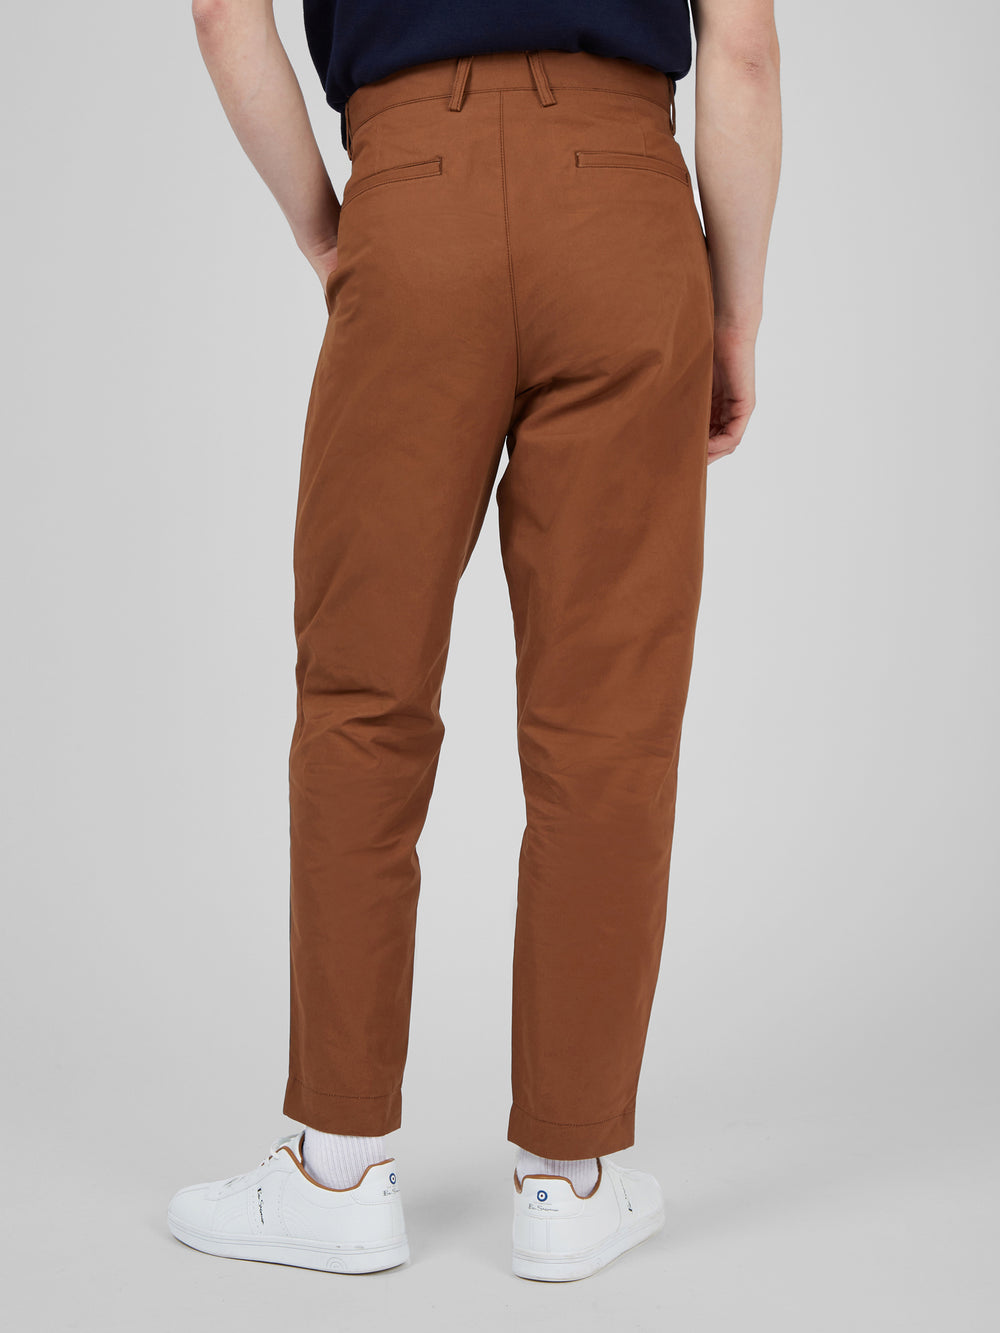 Twill Relaxed-Taper Pleated Trouser - Tan